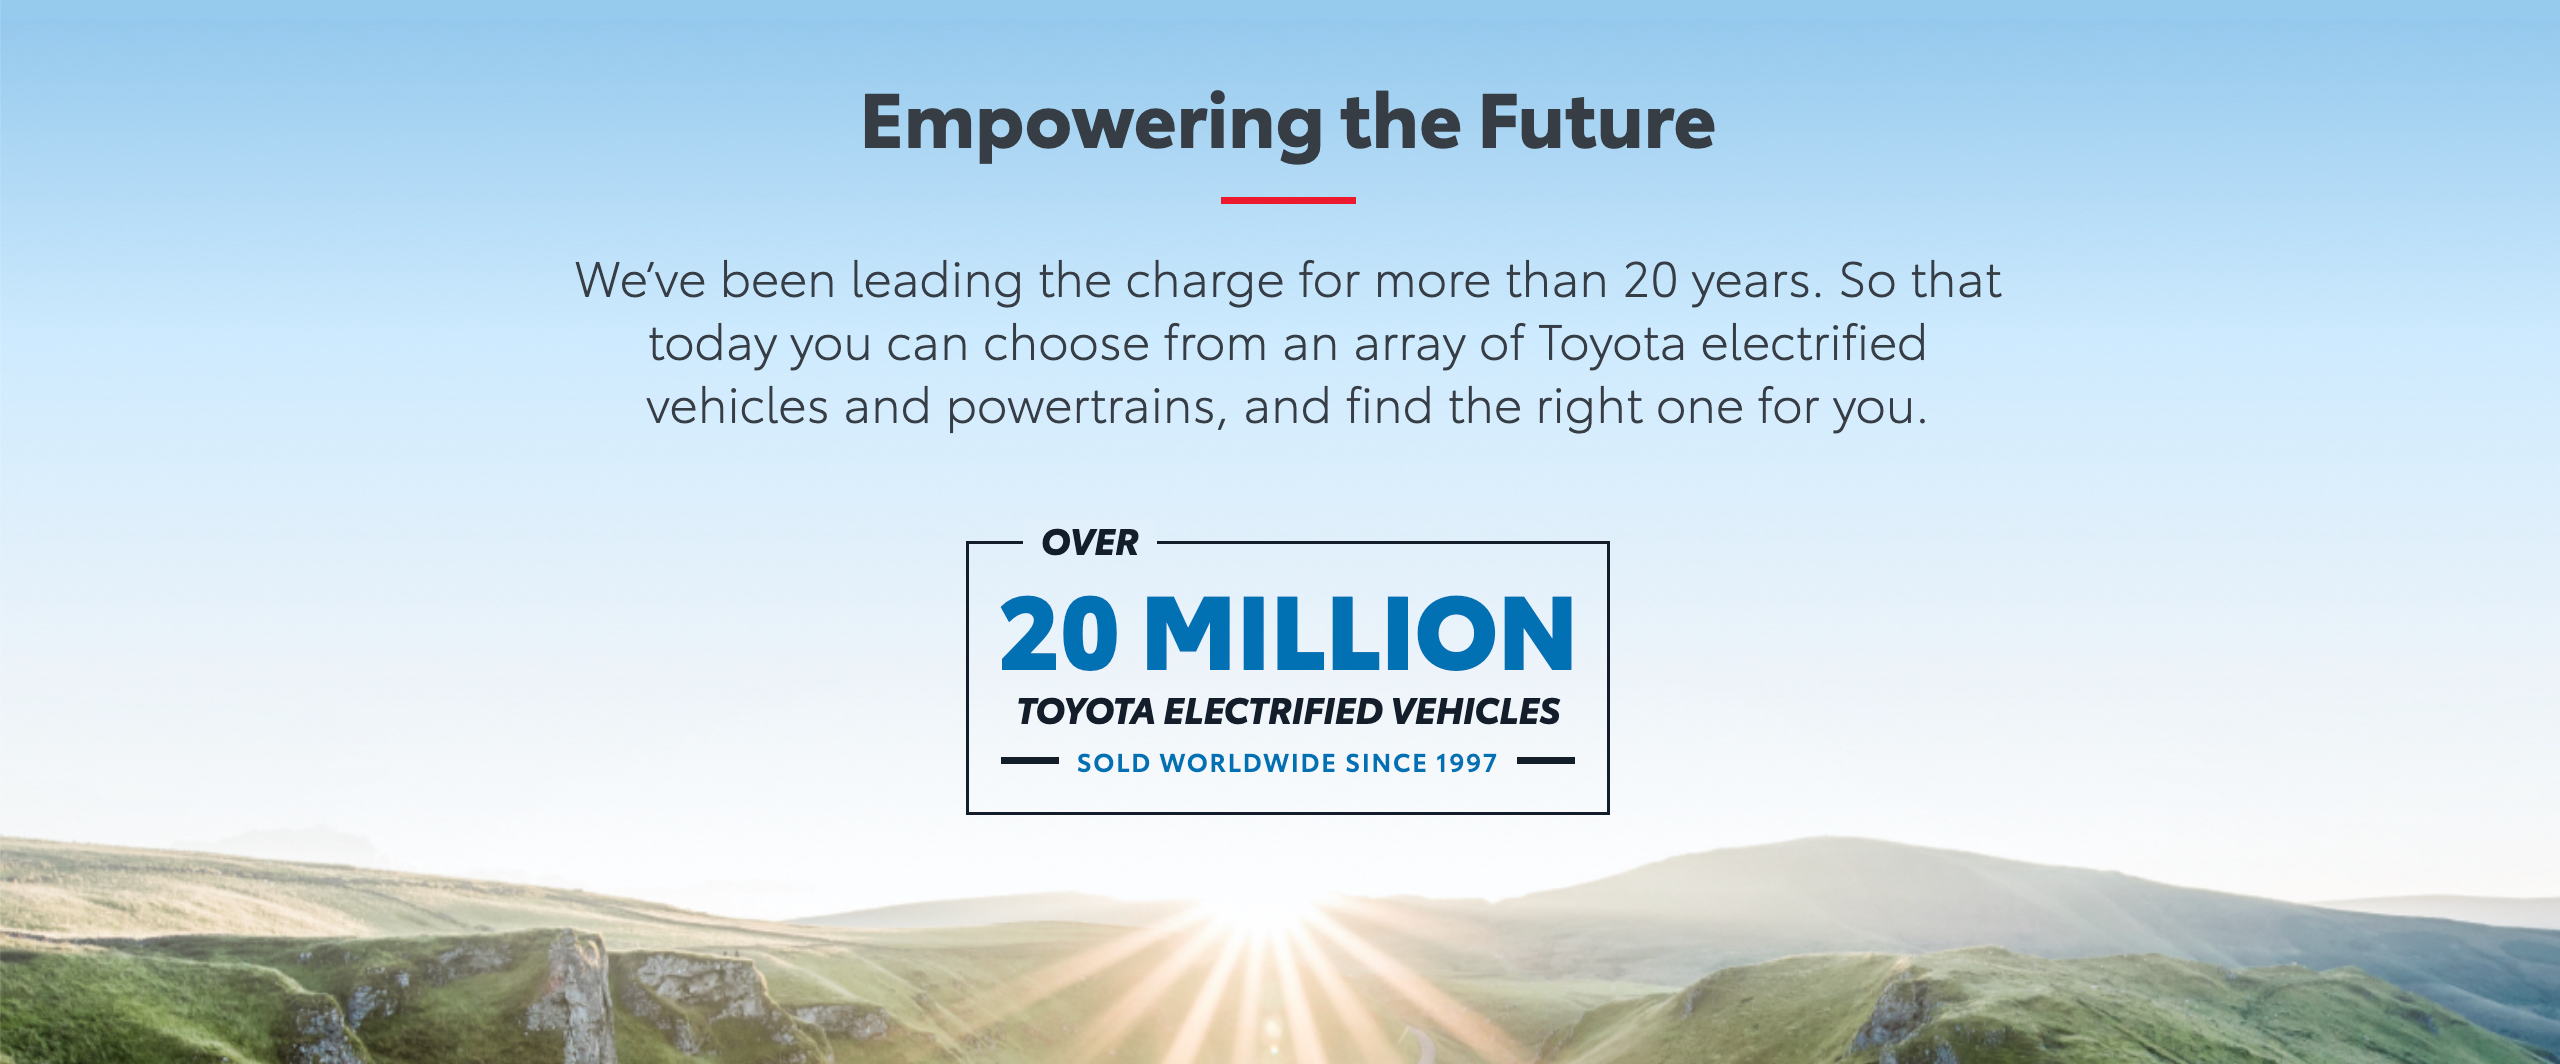 Over 20 million Toyota electrified vehicles sold worldwide since 1997